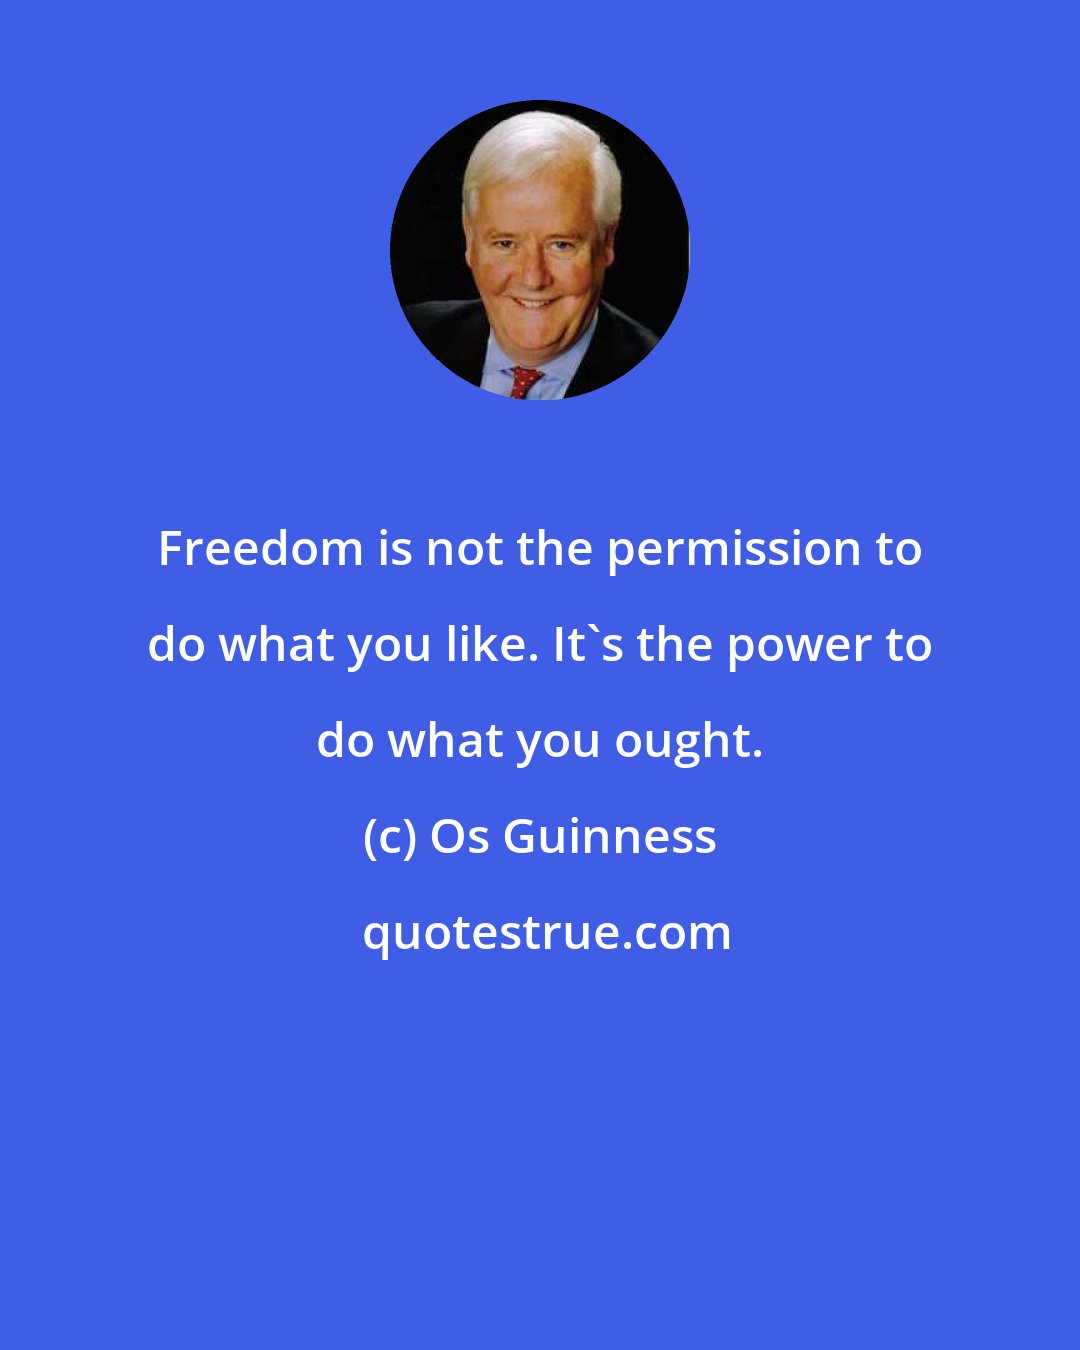 Os Guinness: Freedom is not the permission to do what you like. It's the power to do what you ought.